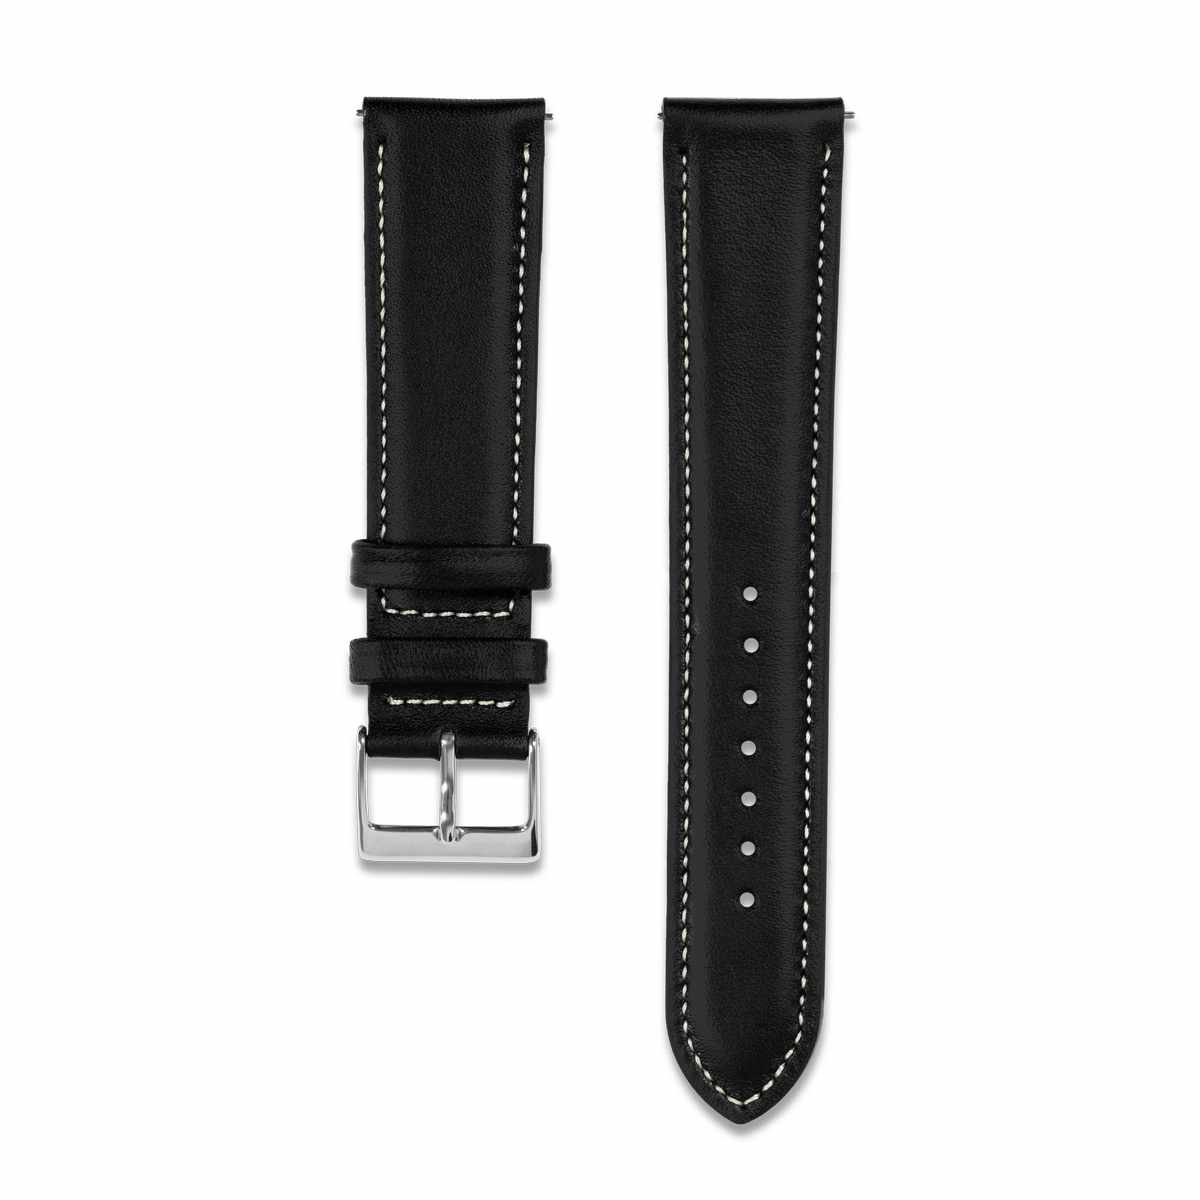 Burgundy leather watchband - 18mm - Rose gold or steel buckle